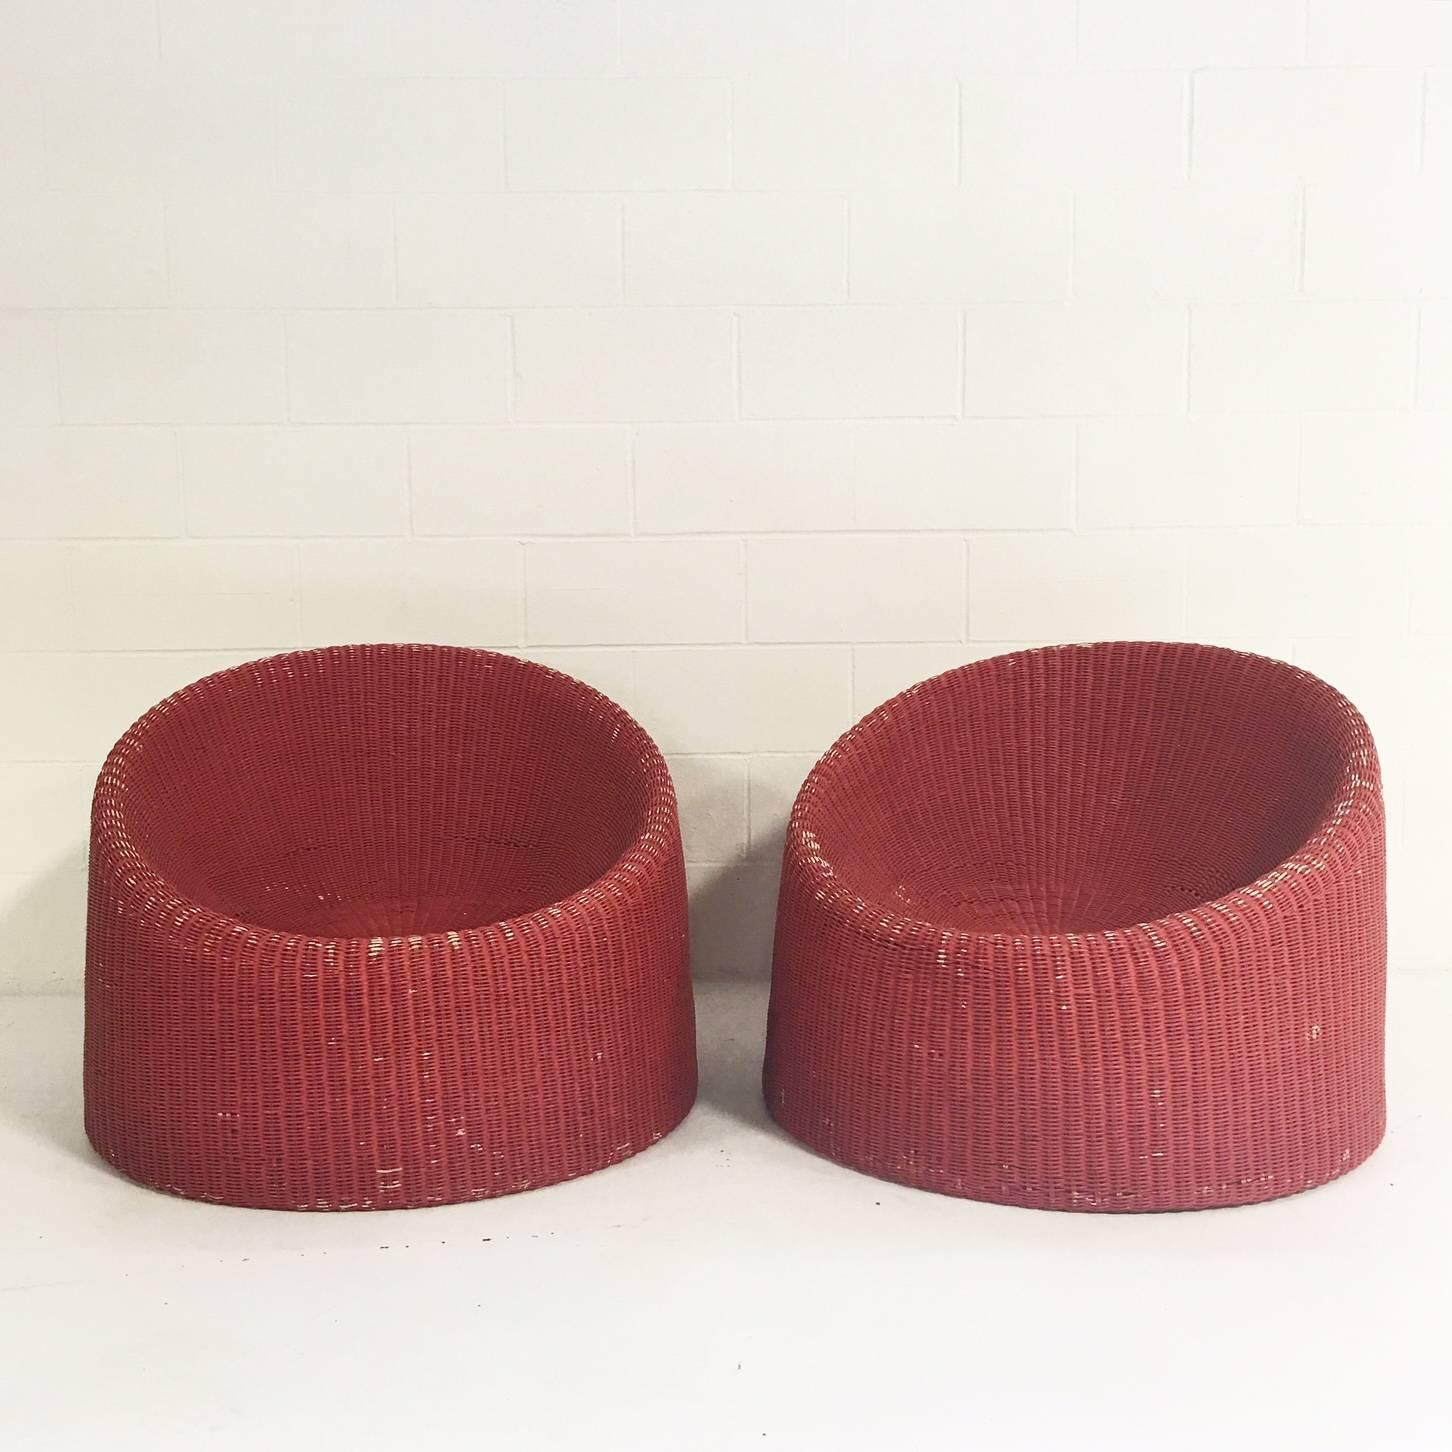 Pair of Eero Aarnio for Stendig Woven Rattan Lounge Chairs with Sheepskin Throws 1